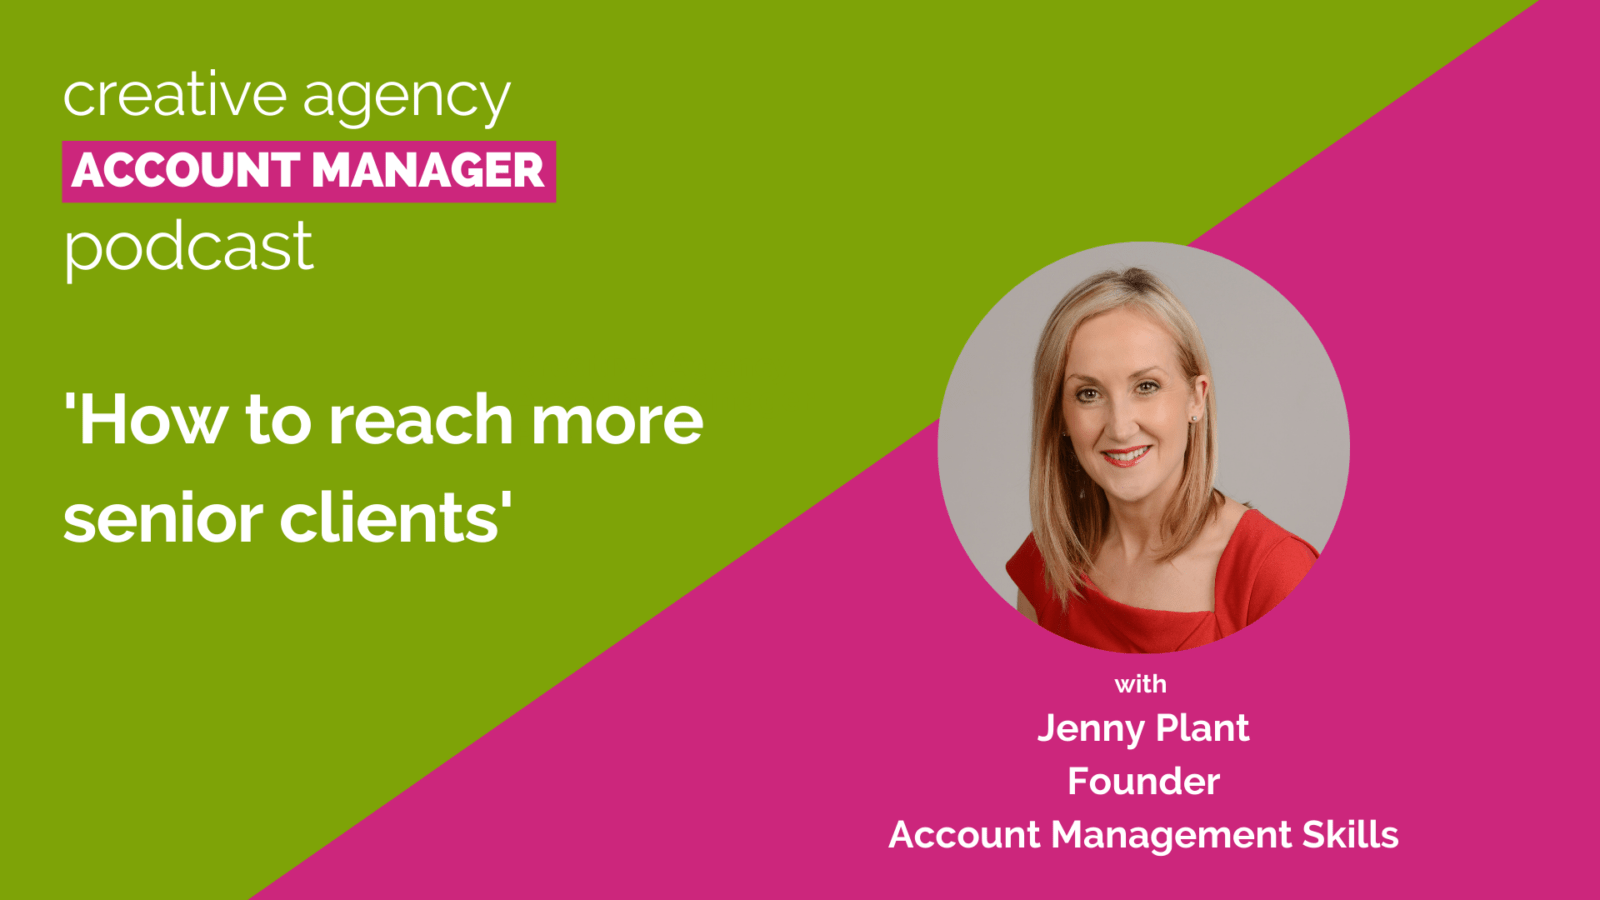 How to reach more senior clients, with Jenny Plant